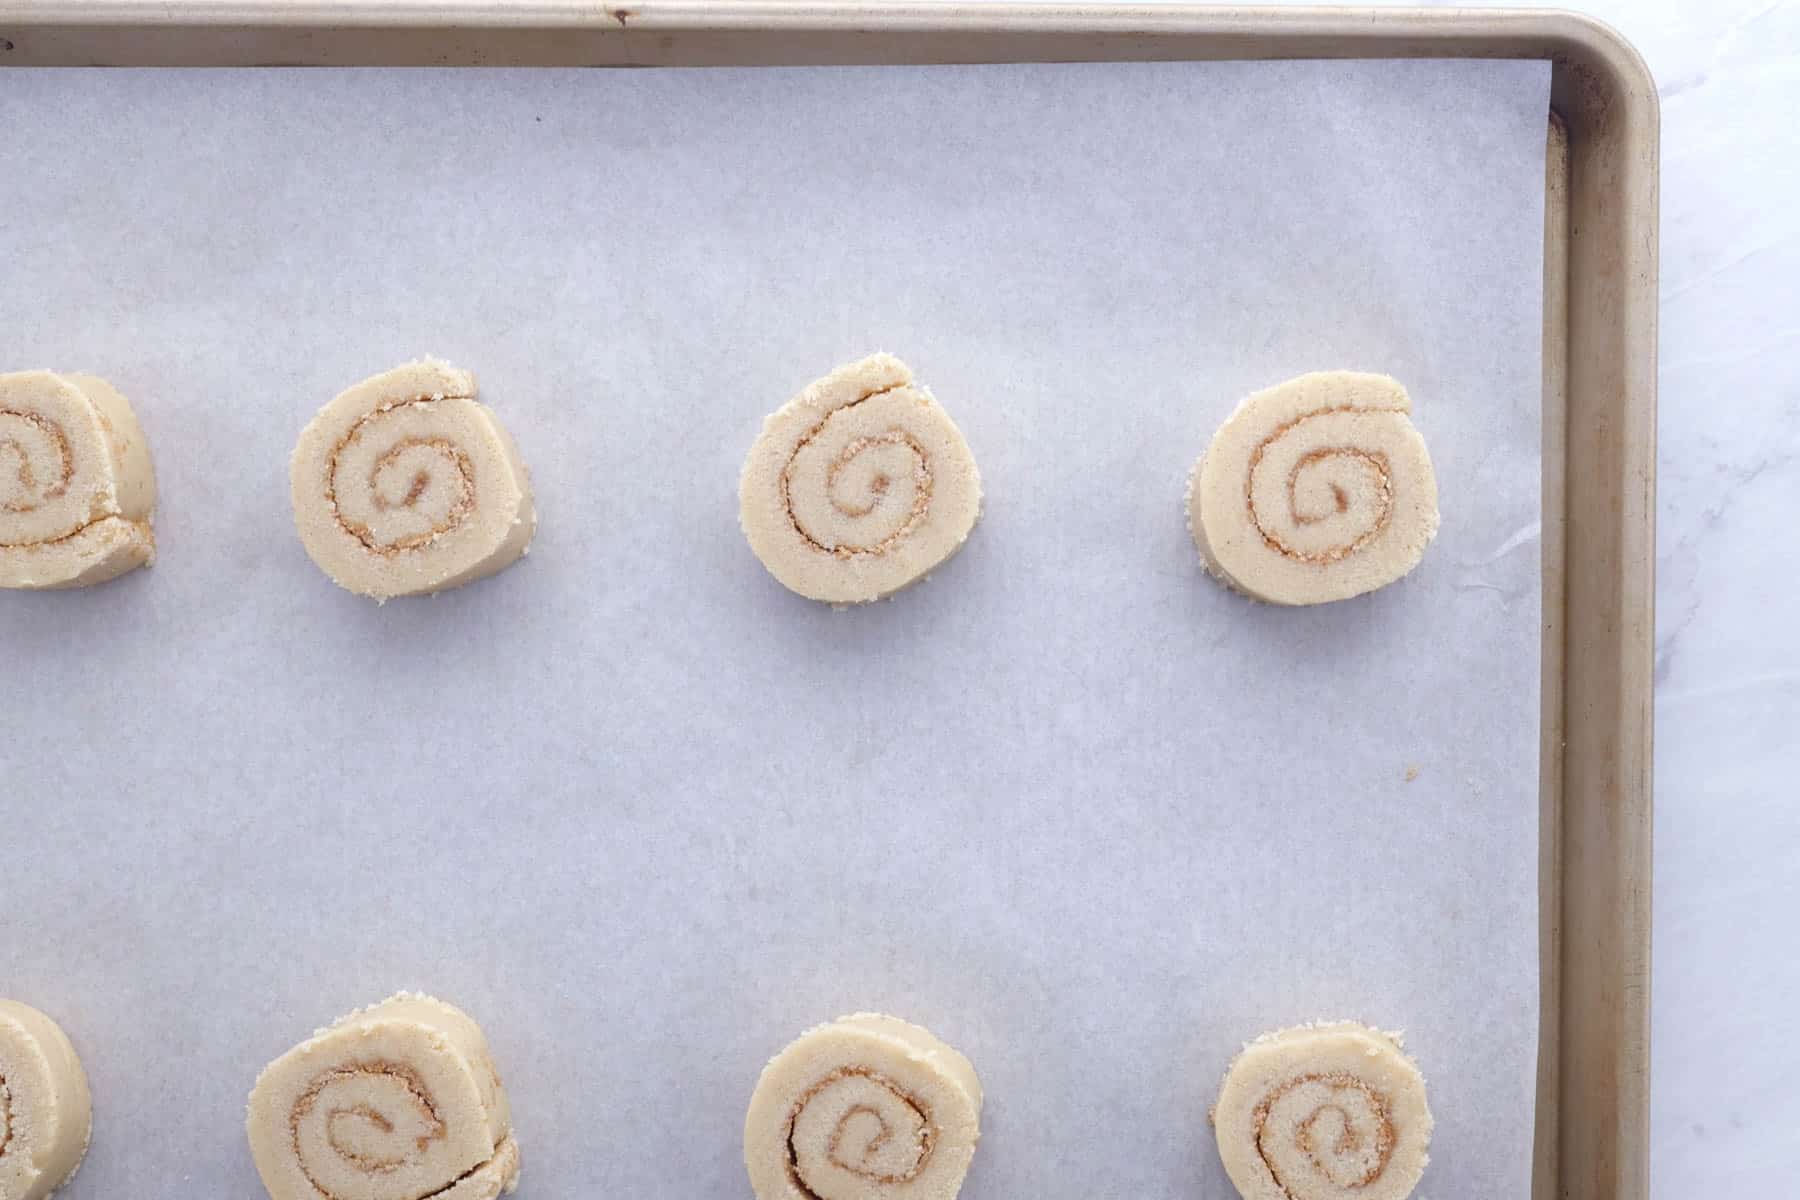 Cinnamon roll cookies are spaced out on a baking sheet.